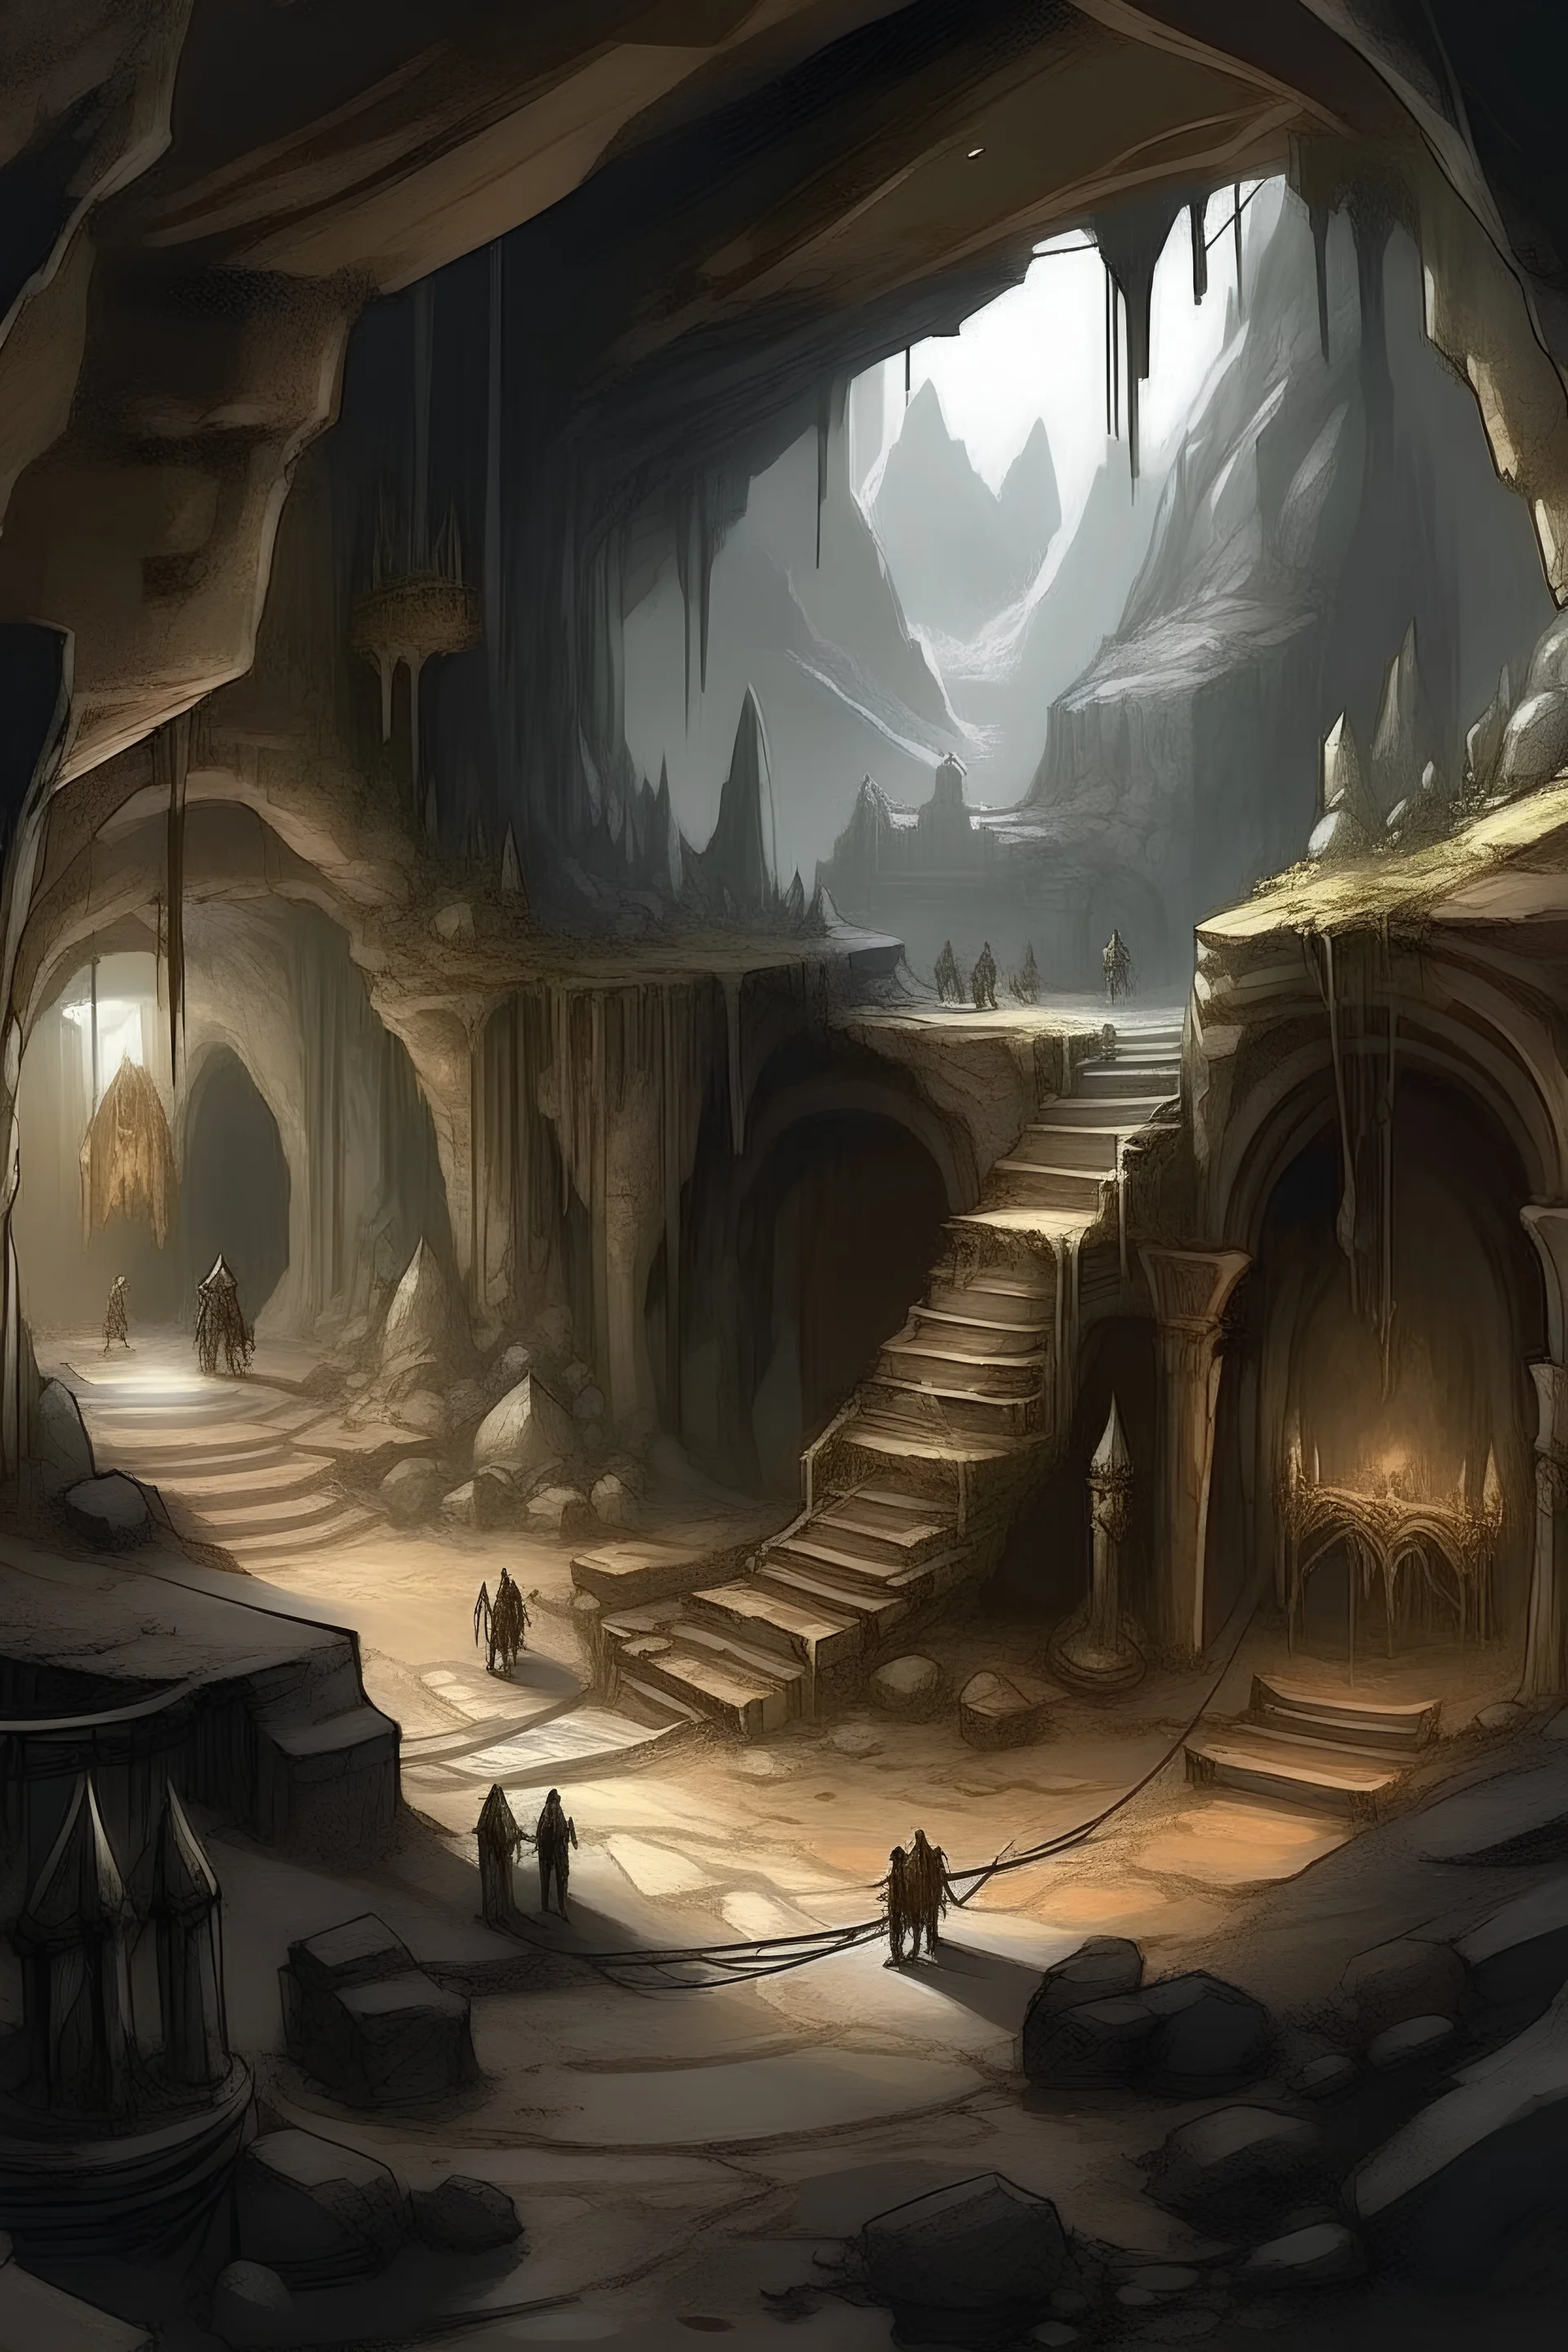 The kingdom of Darv is a network of underground passages and enormous caves that can span up to several kilometers, wherein the Dwarven race resides